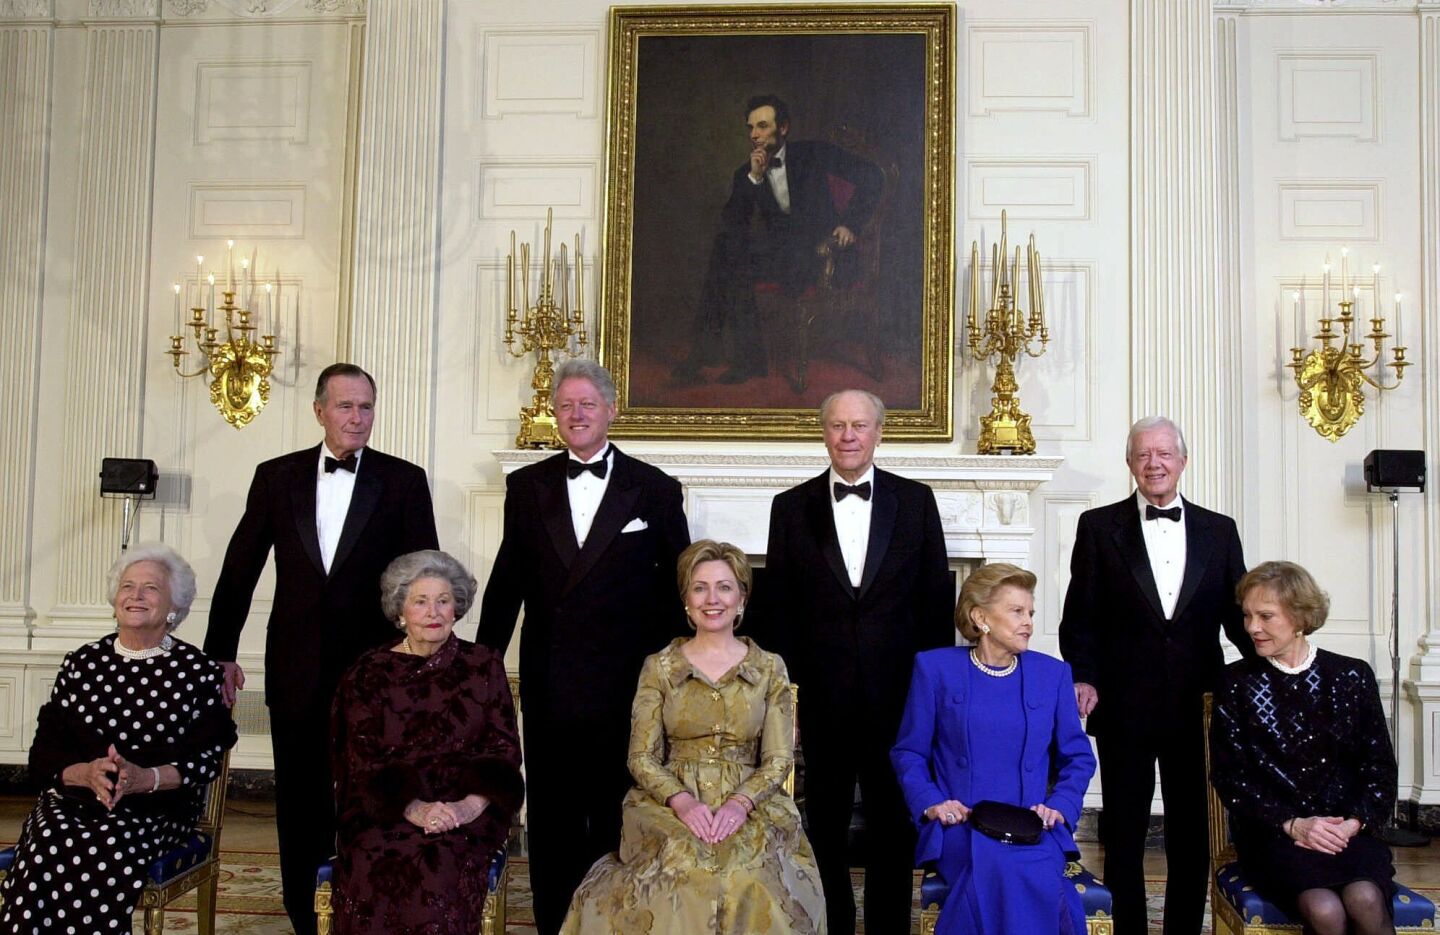 Former presidents and first ladies pose during a dinner in honor of the 200th anniversary of the White House on Nov. 9, 2000. Barbara Bush is at the far left.